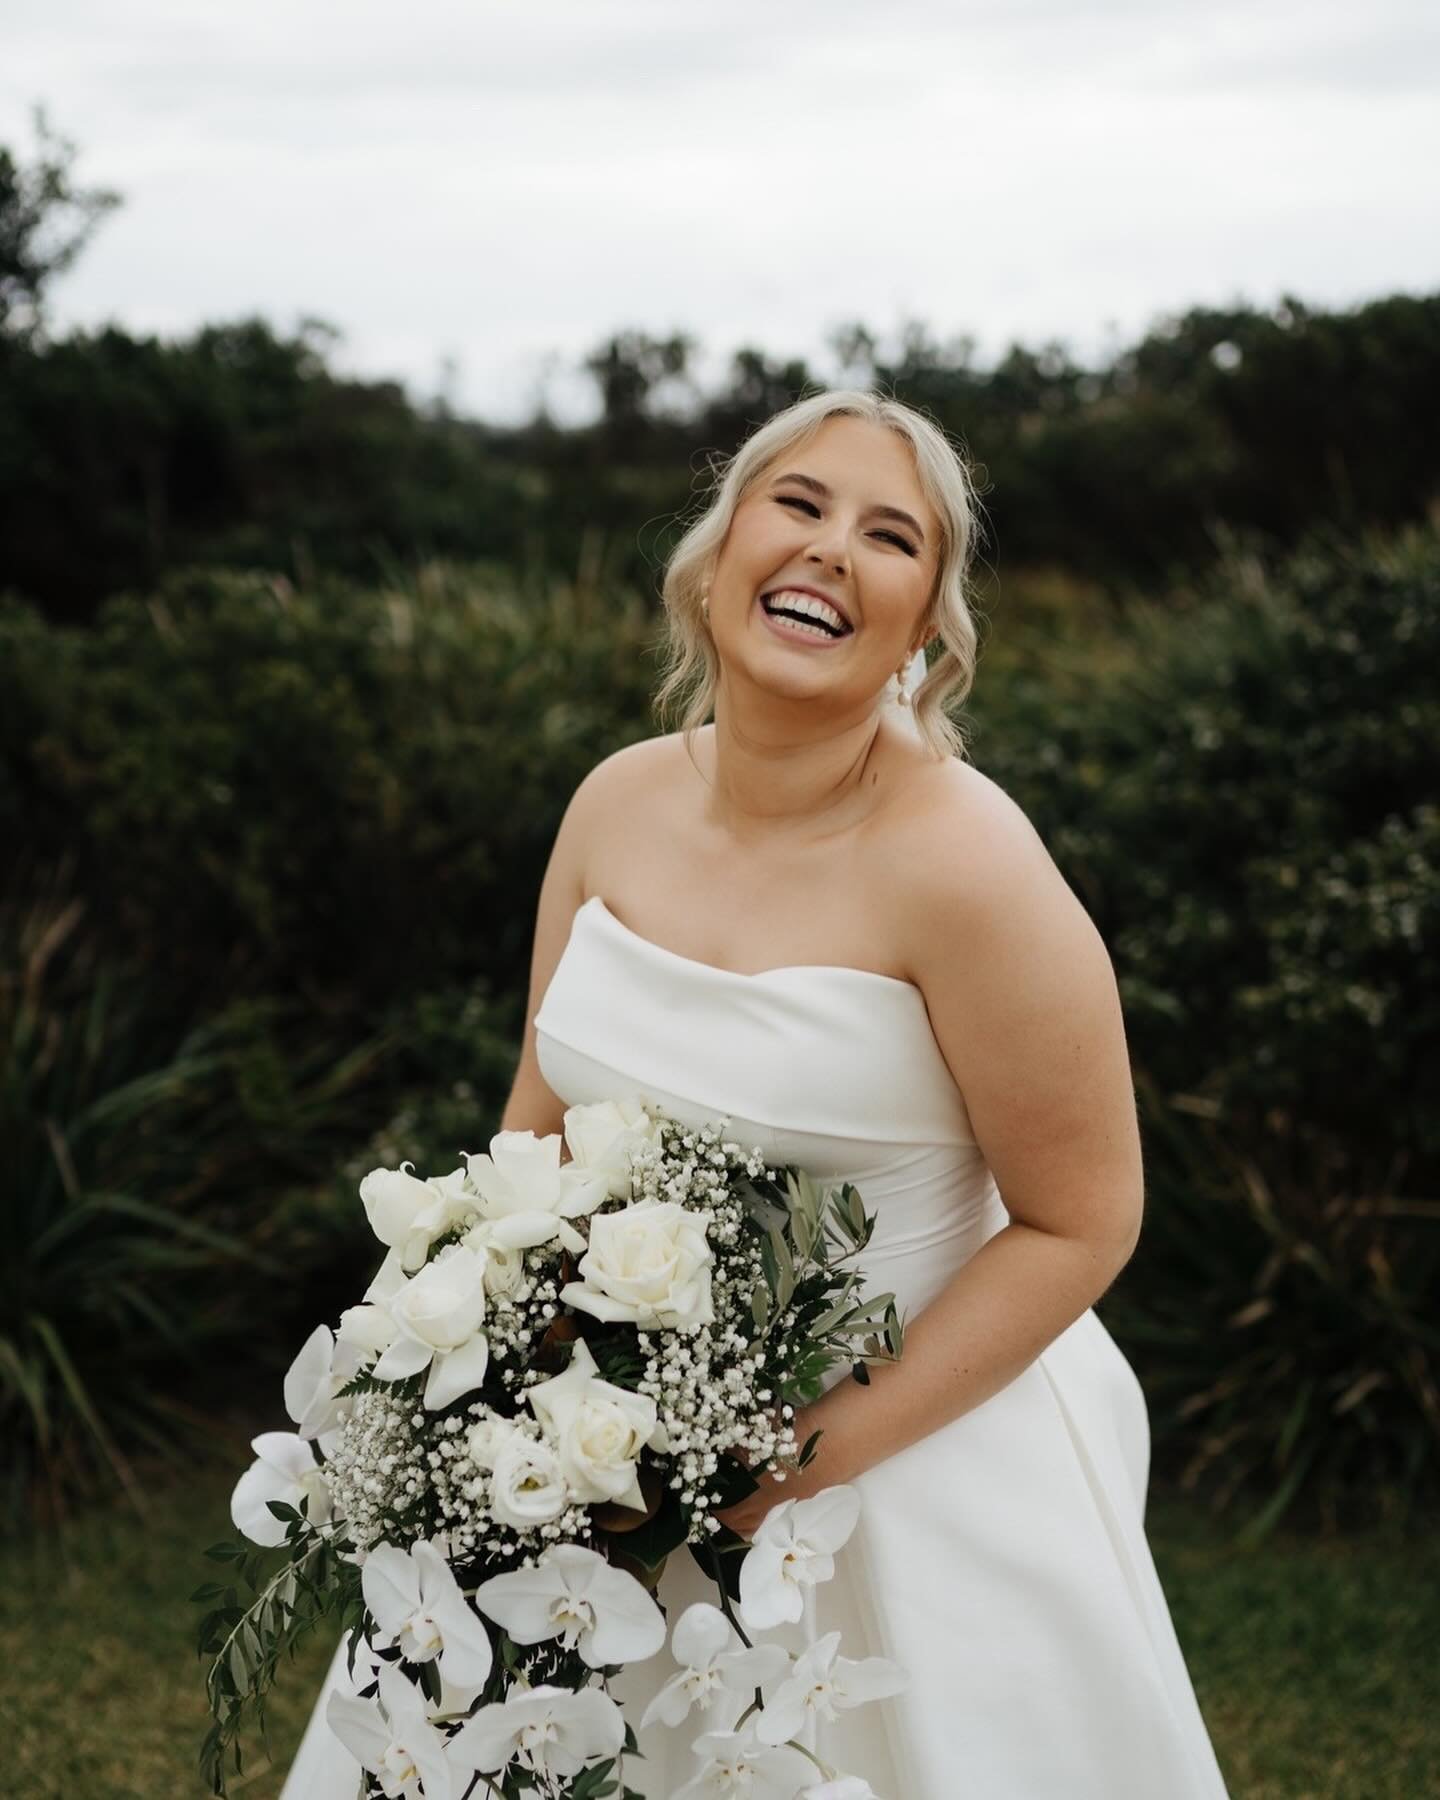 Tara&rsquo;s smile was beaming all day 😍
⠀⠀⠀⠀⠀⠀⠀⠀⠀
Want to know the secret to getting the best wedding photos? Smile! It seems so simple, but it really does make all the difference!
⠀⠀⠀⠀⠀⠀⠀⠀⠀
⠀⠀⠀⠀⠀⠀⠀⠀⠀
⠀⠀⠀⠀⠀⠀⠀⠀⠀
⠀⠀⠀⠀⠀⠀⠀⠀⠀
⠀⠀⠀⠀⠀⠀⠀⠀⠀
#weddingphotograp